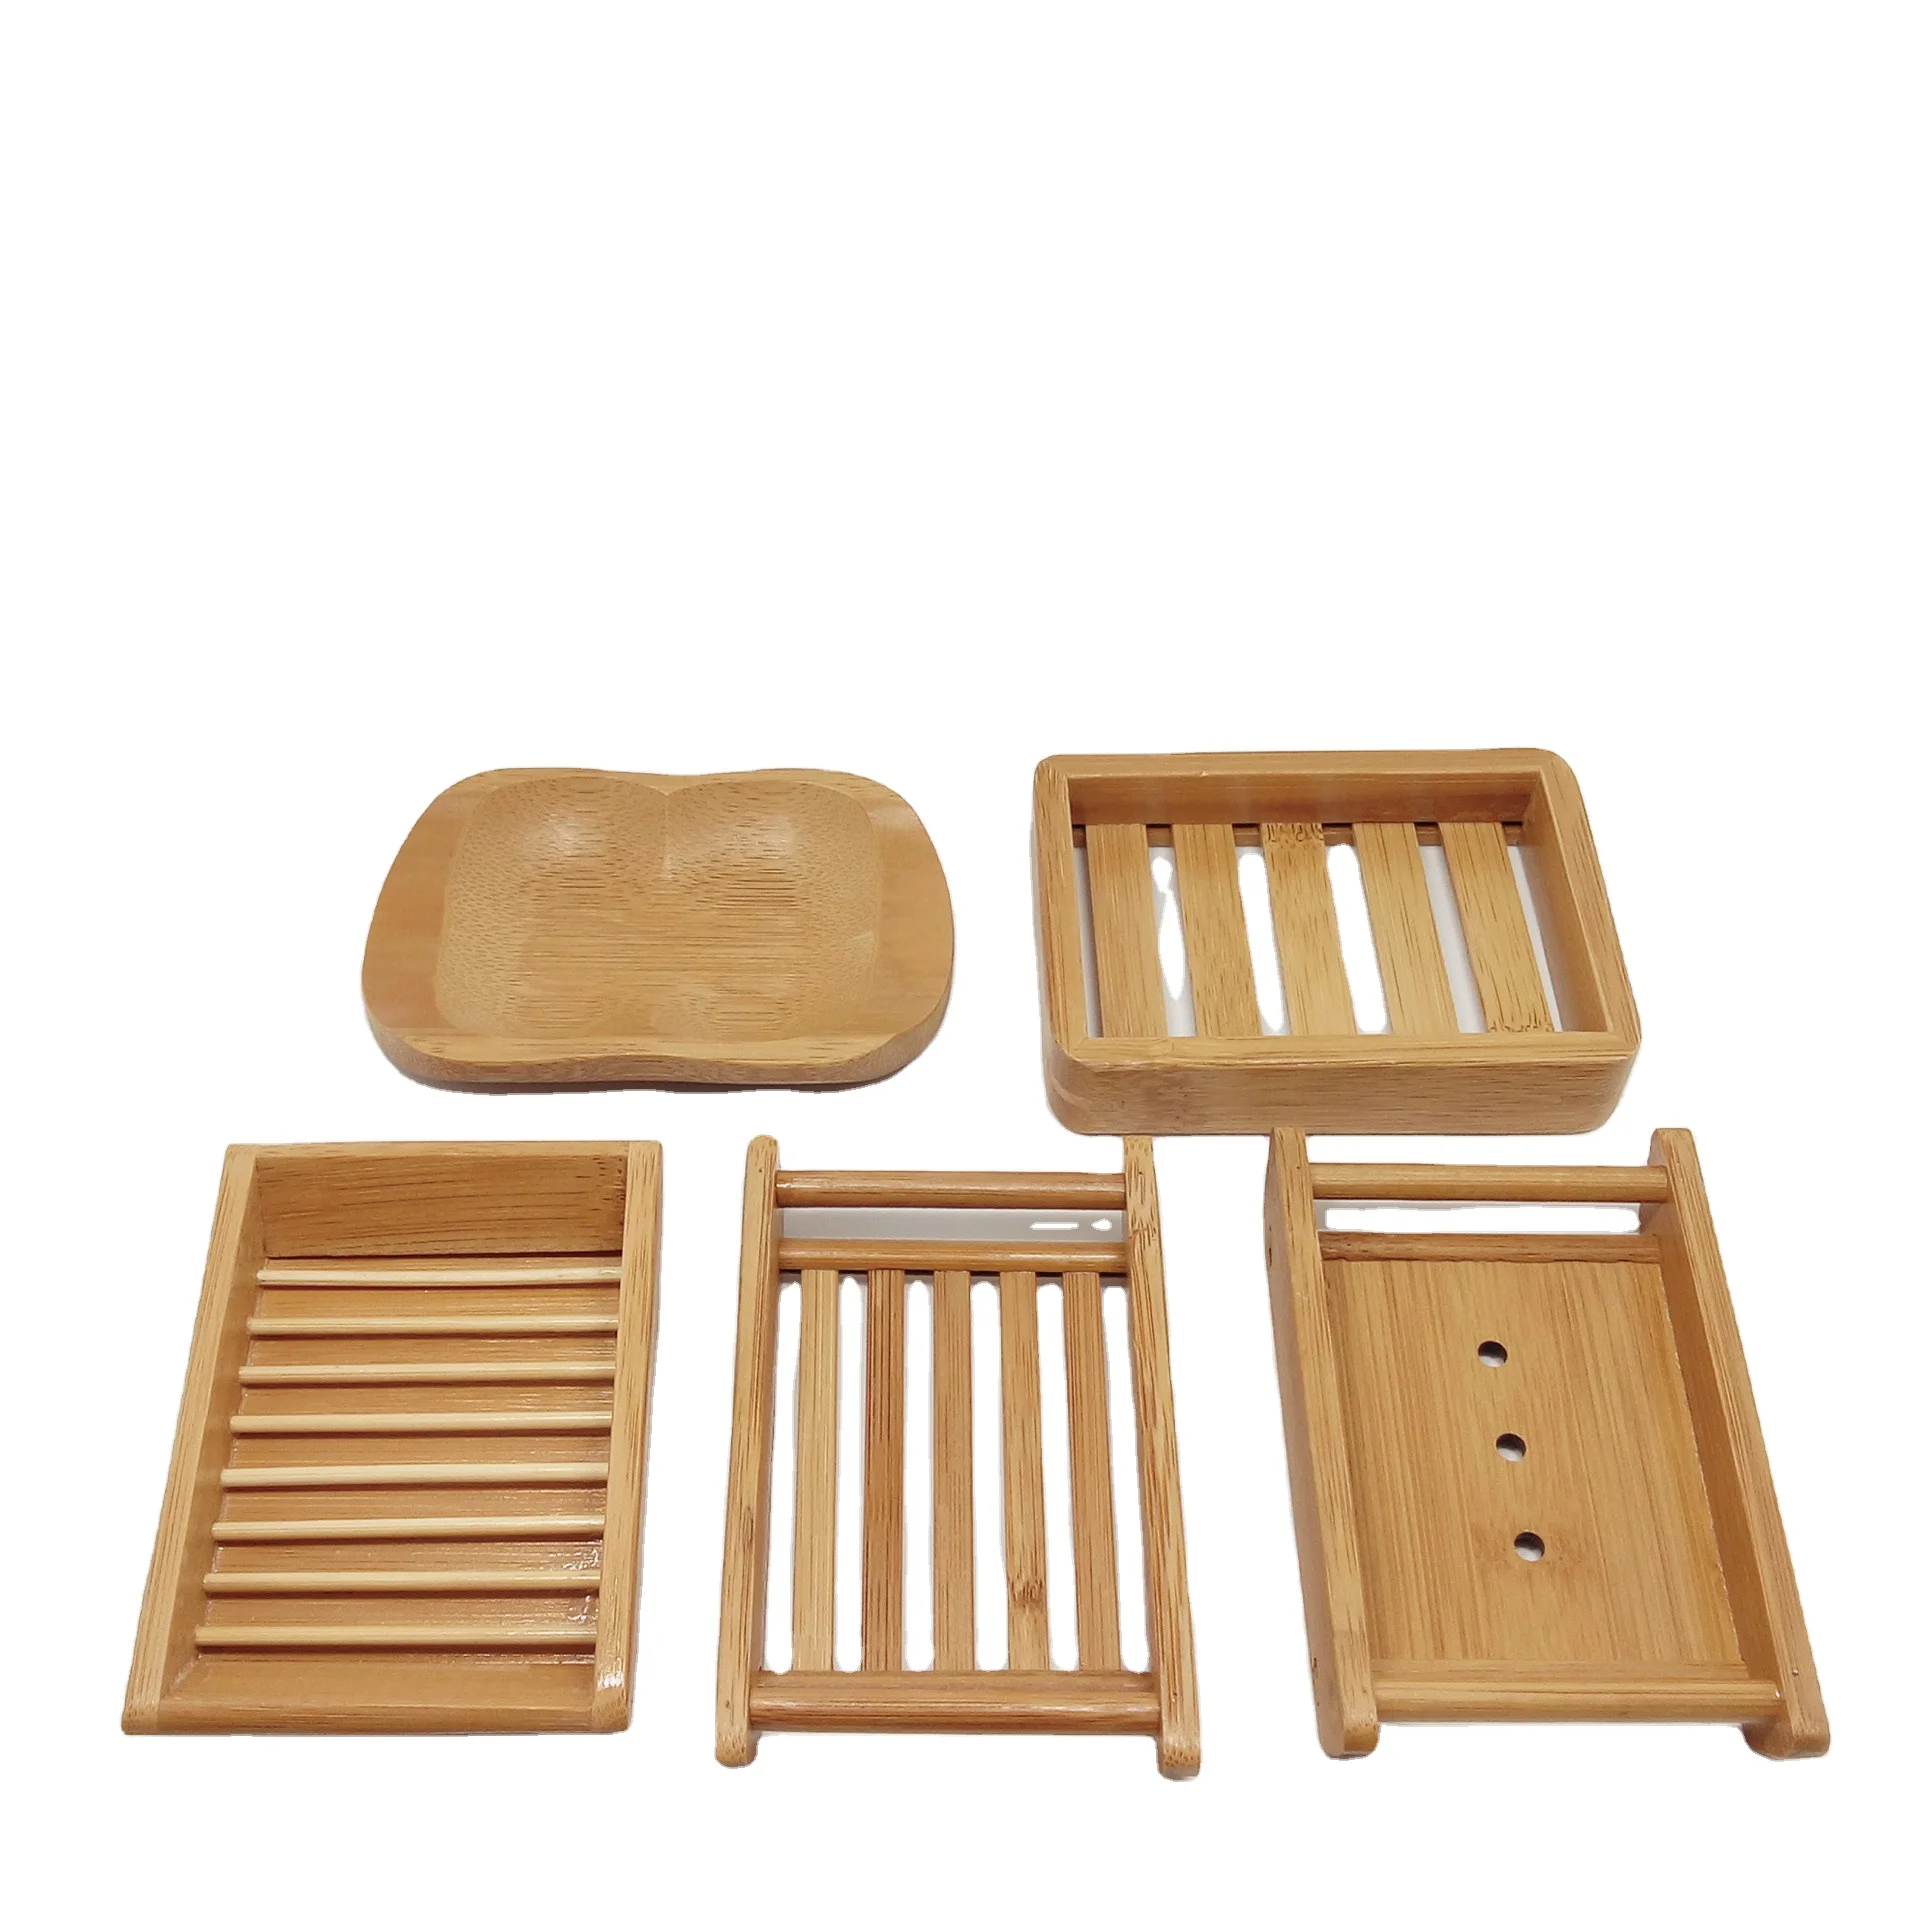 H661 Bathroom Organizing Accessories Environmental Drying Soaps Holder Natural Colour Drain Wood Bamboo Soap Dishes